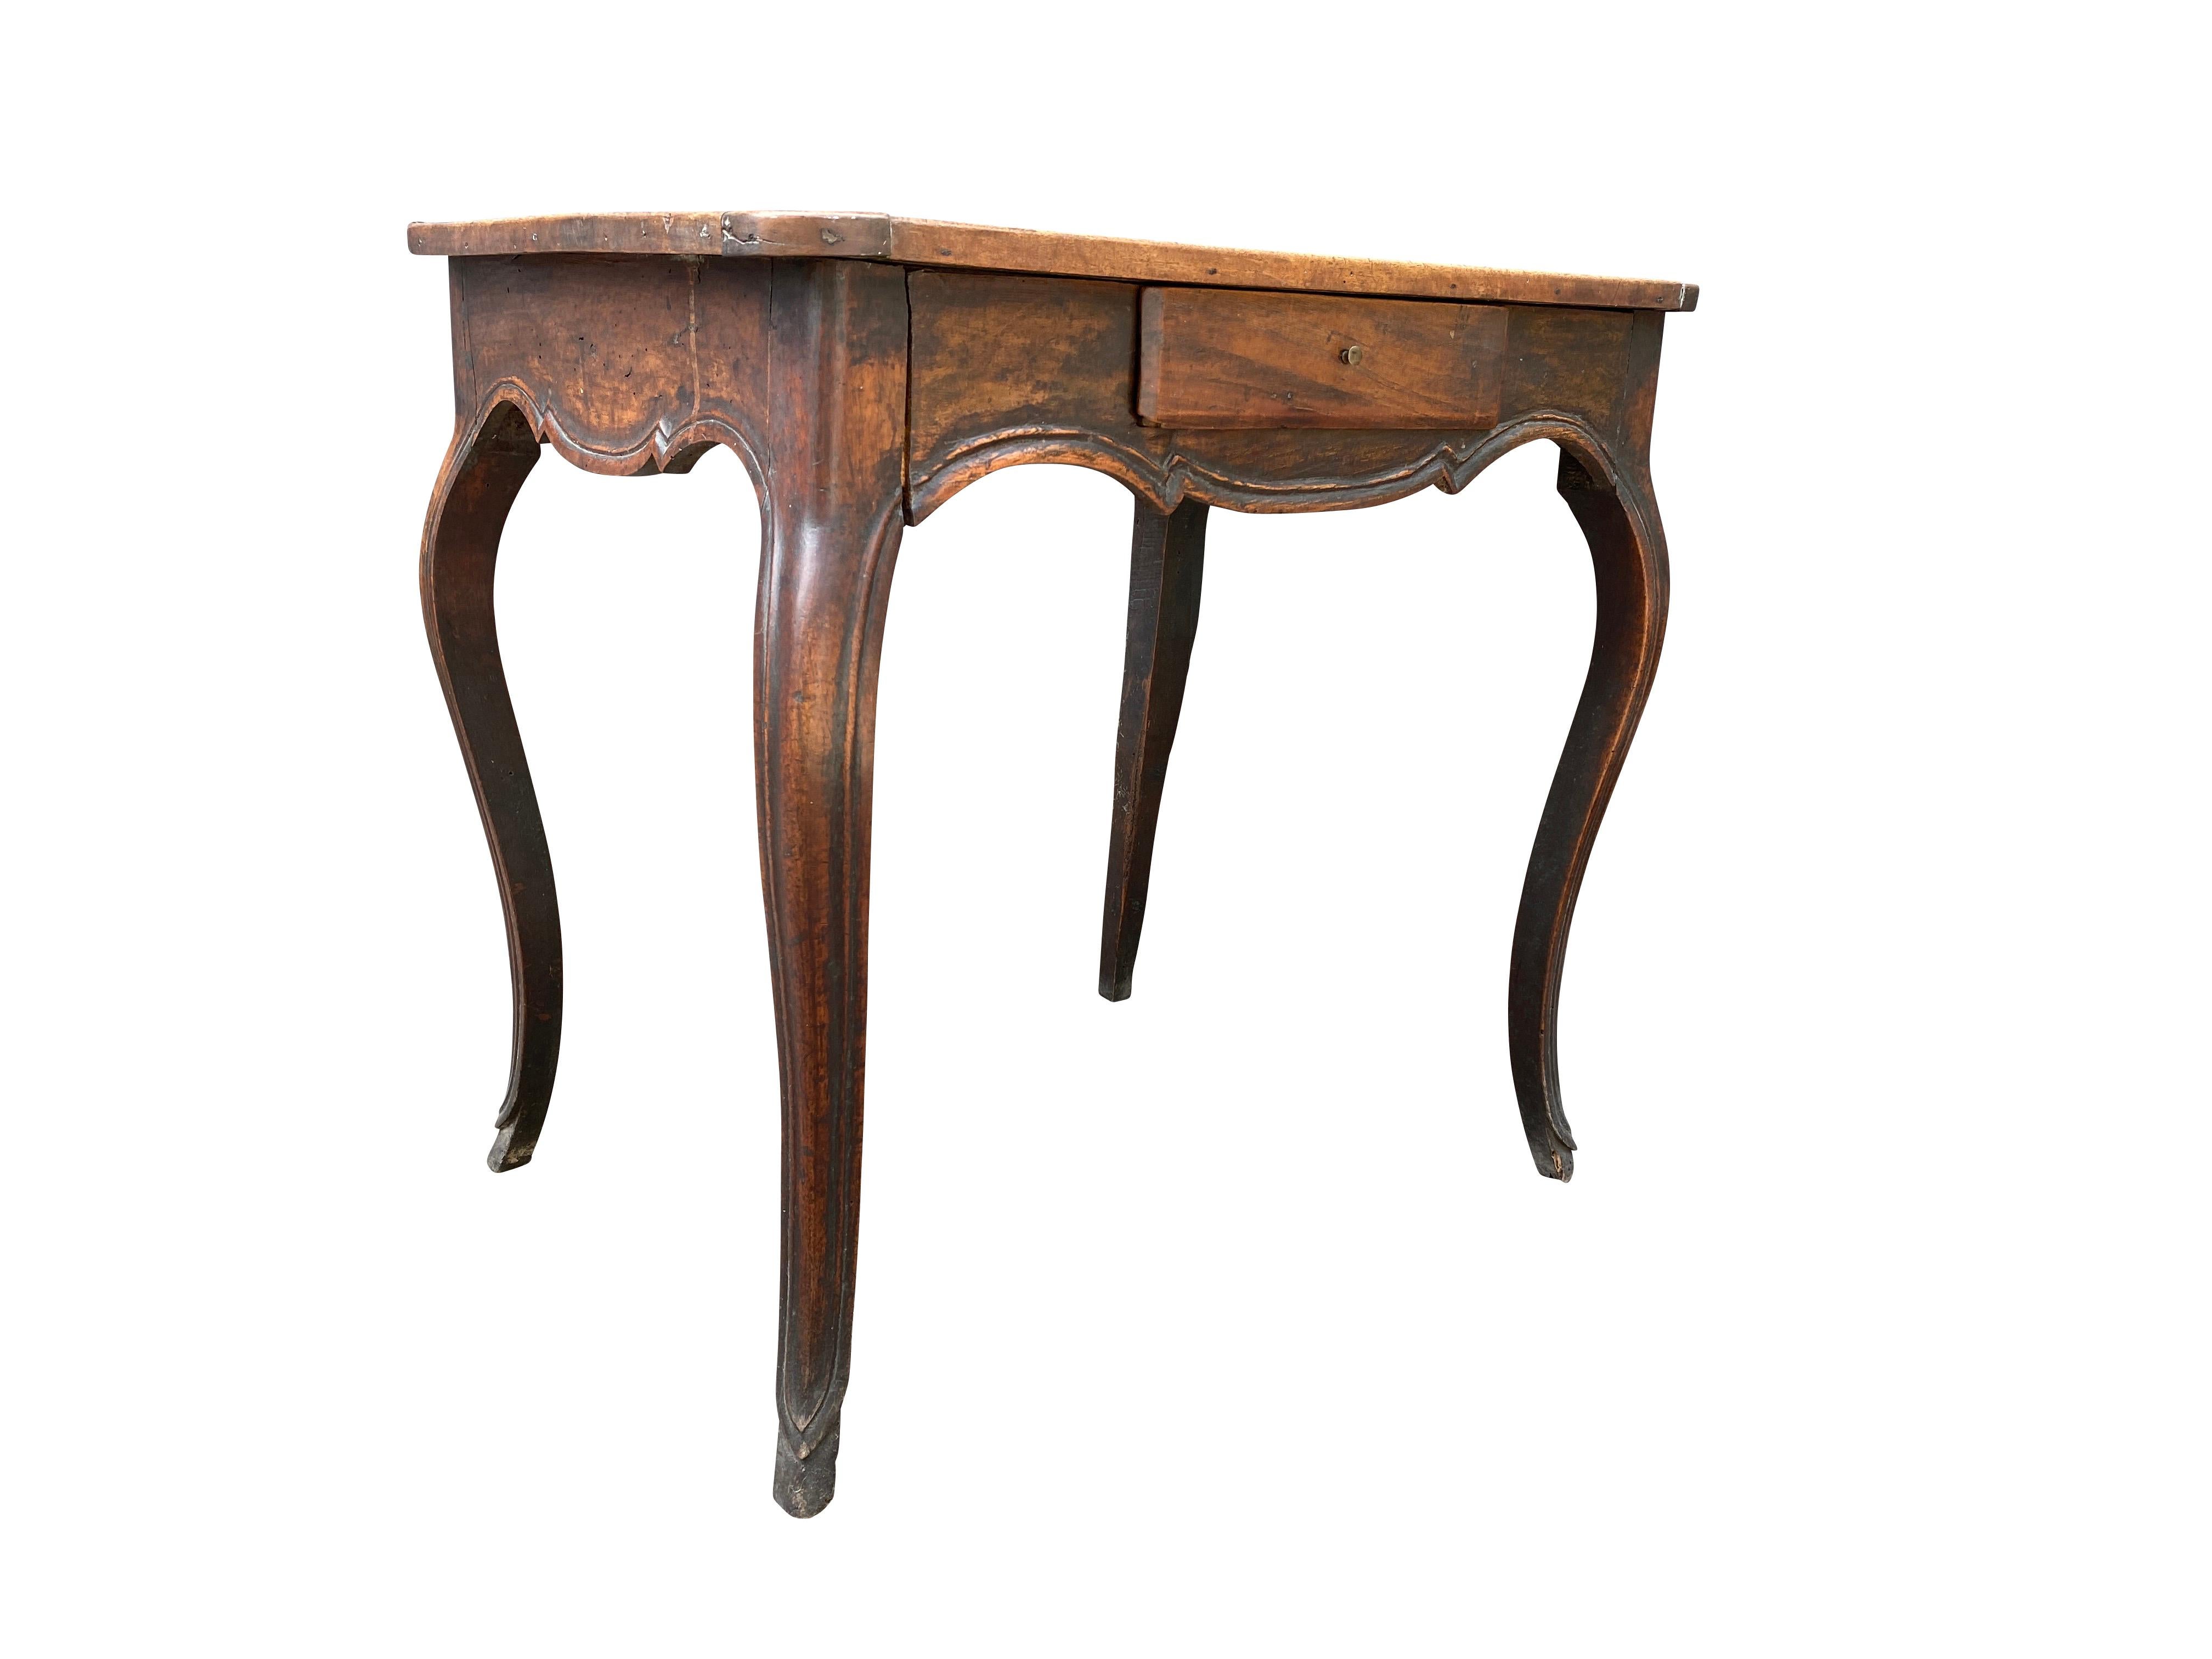 Rectangular top with rounded corners and a conforming frieze with drawer, raised on cabriole legs.